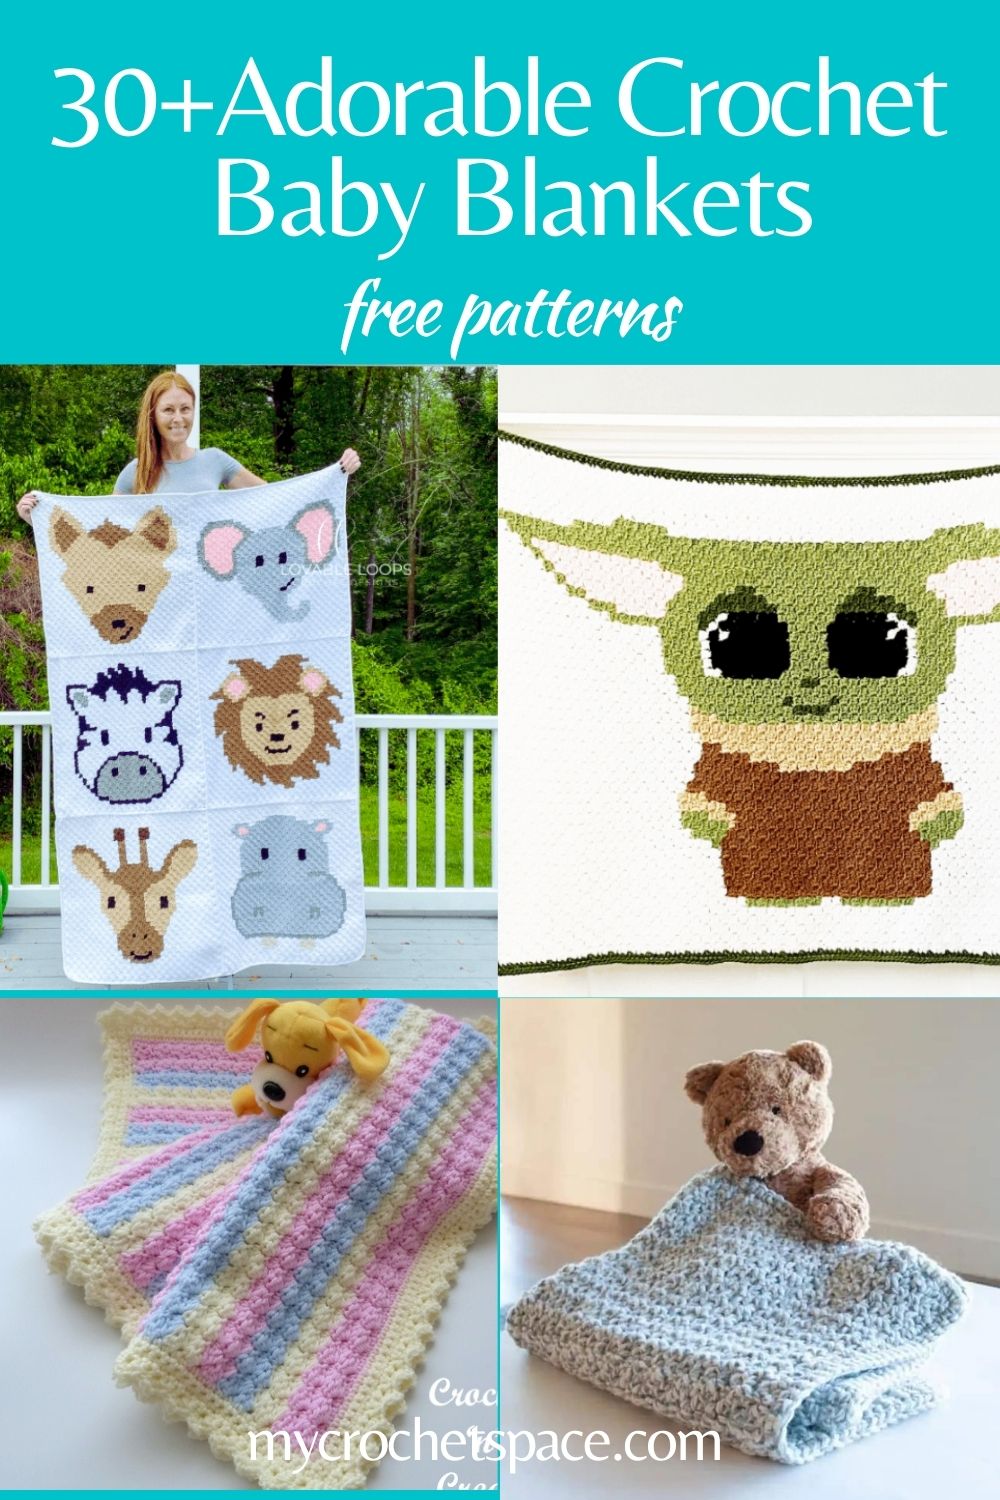 30+ Adorable Free Crochet Baby Blanket Patterns - My Crochet Space